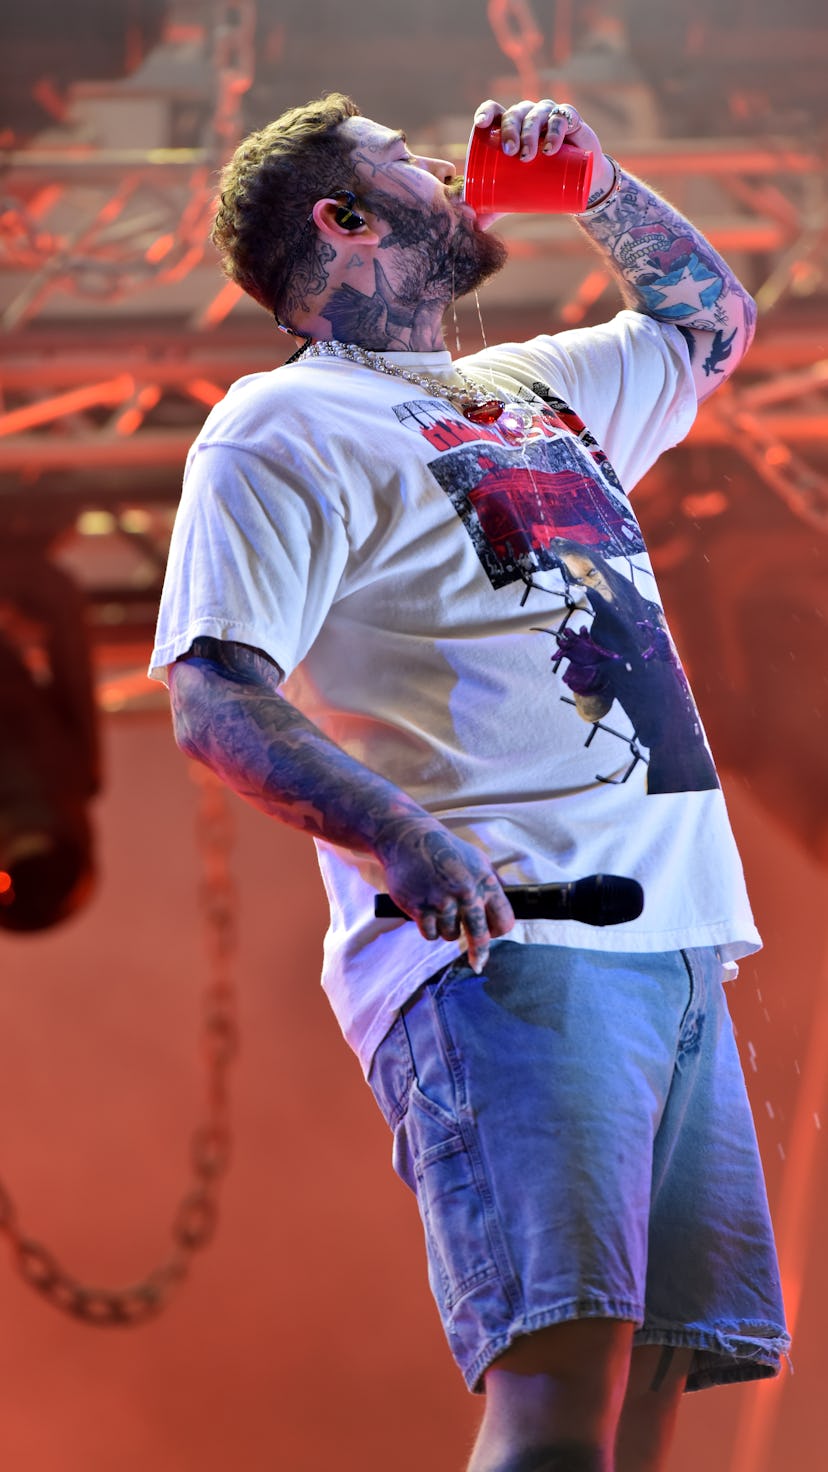 READING, ENGLAND - AUGUST 28: EDITORIAL USE ONLY Post Malone headlines the Main Stage during Day 2 o...